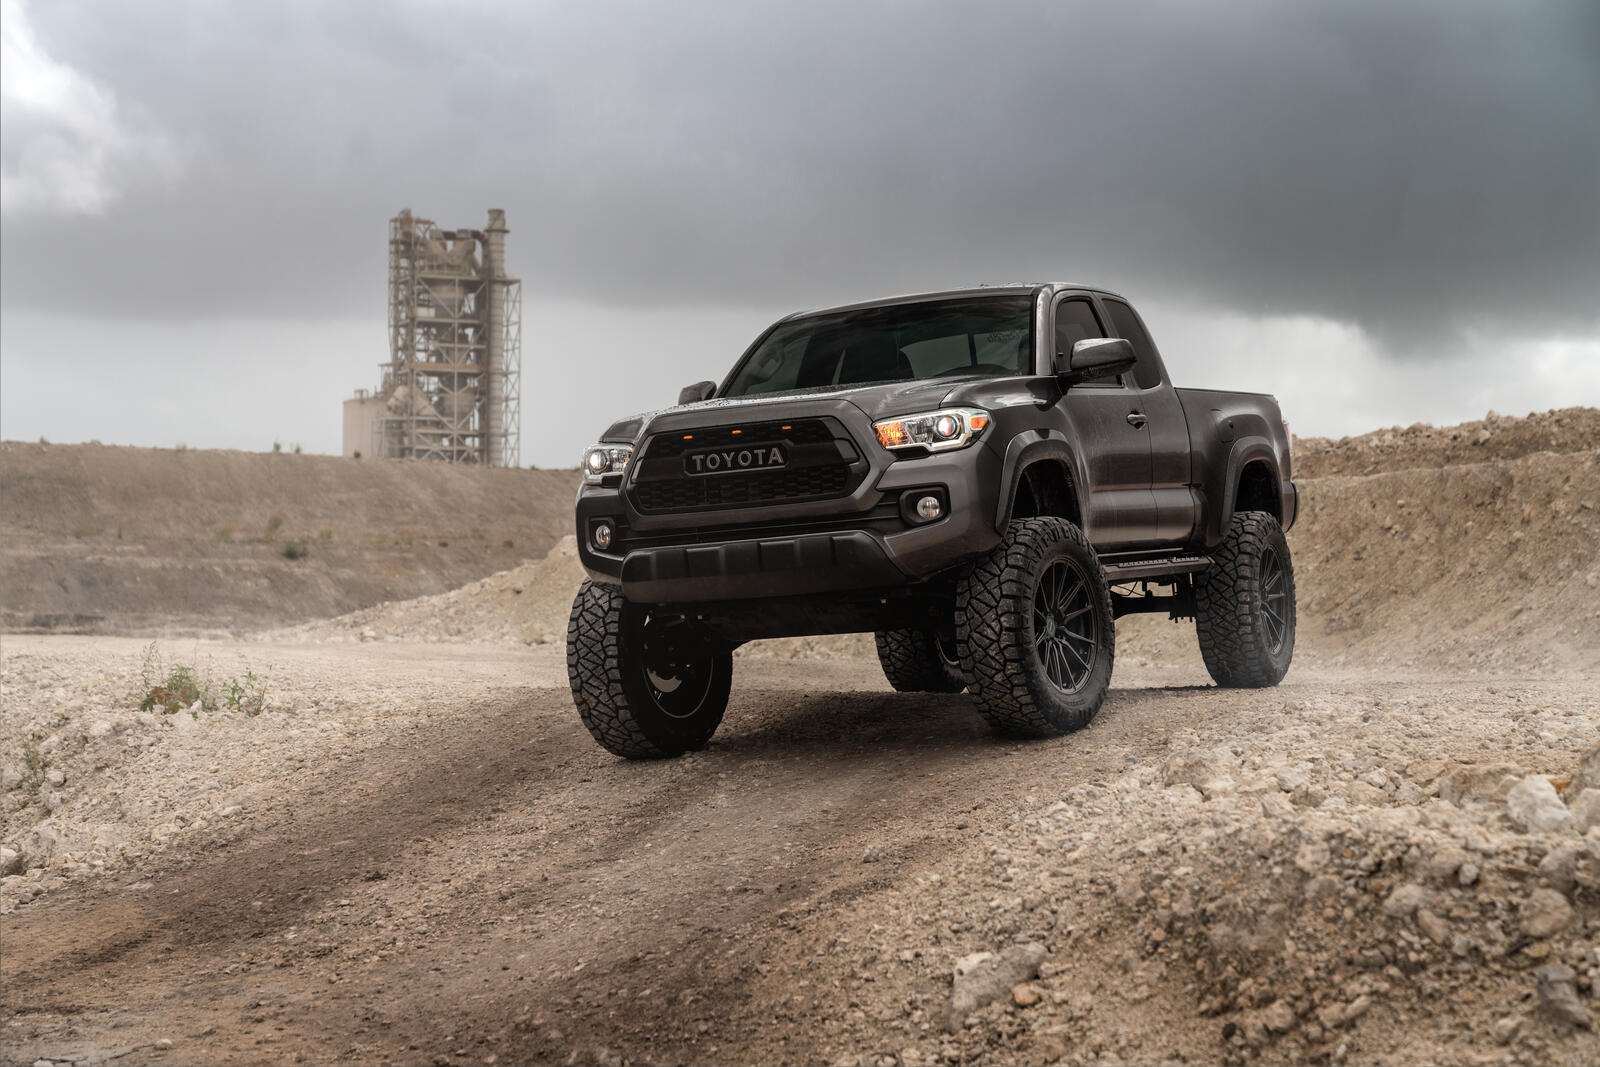 Wallpapers Toyota Tacoma Toyota 2019 Cars on the desktop